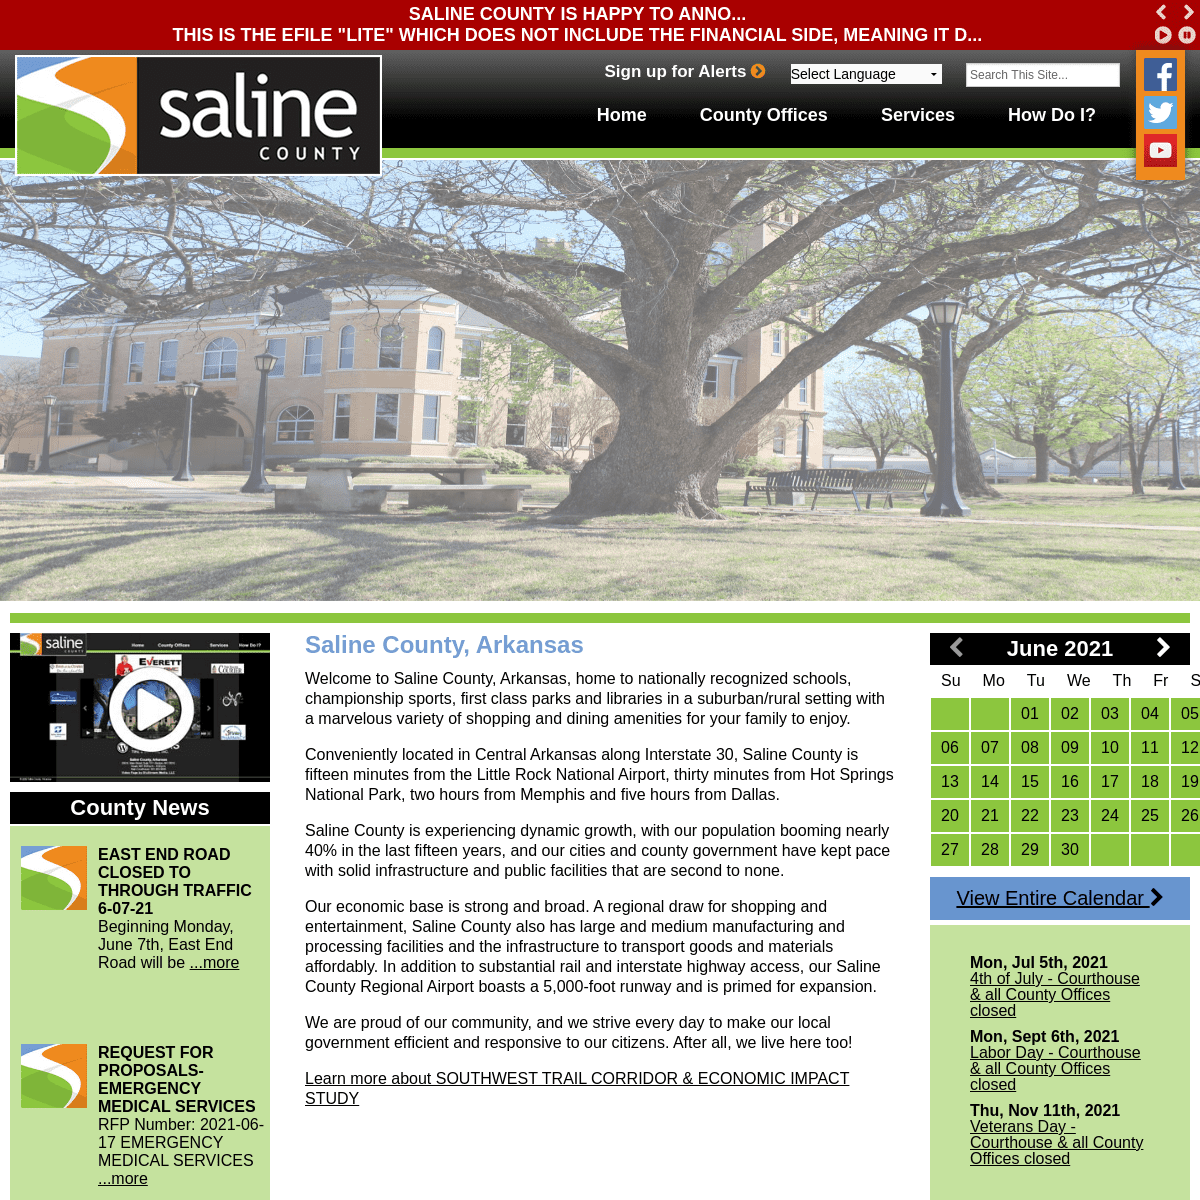 A complete backup of https://salinecounty.org